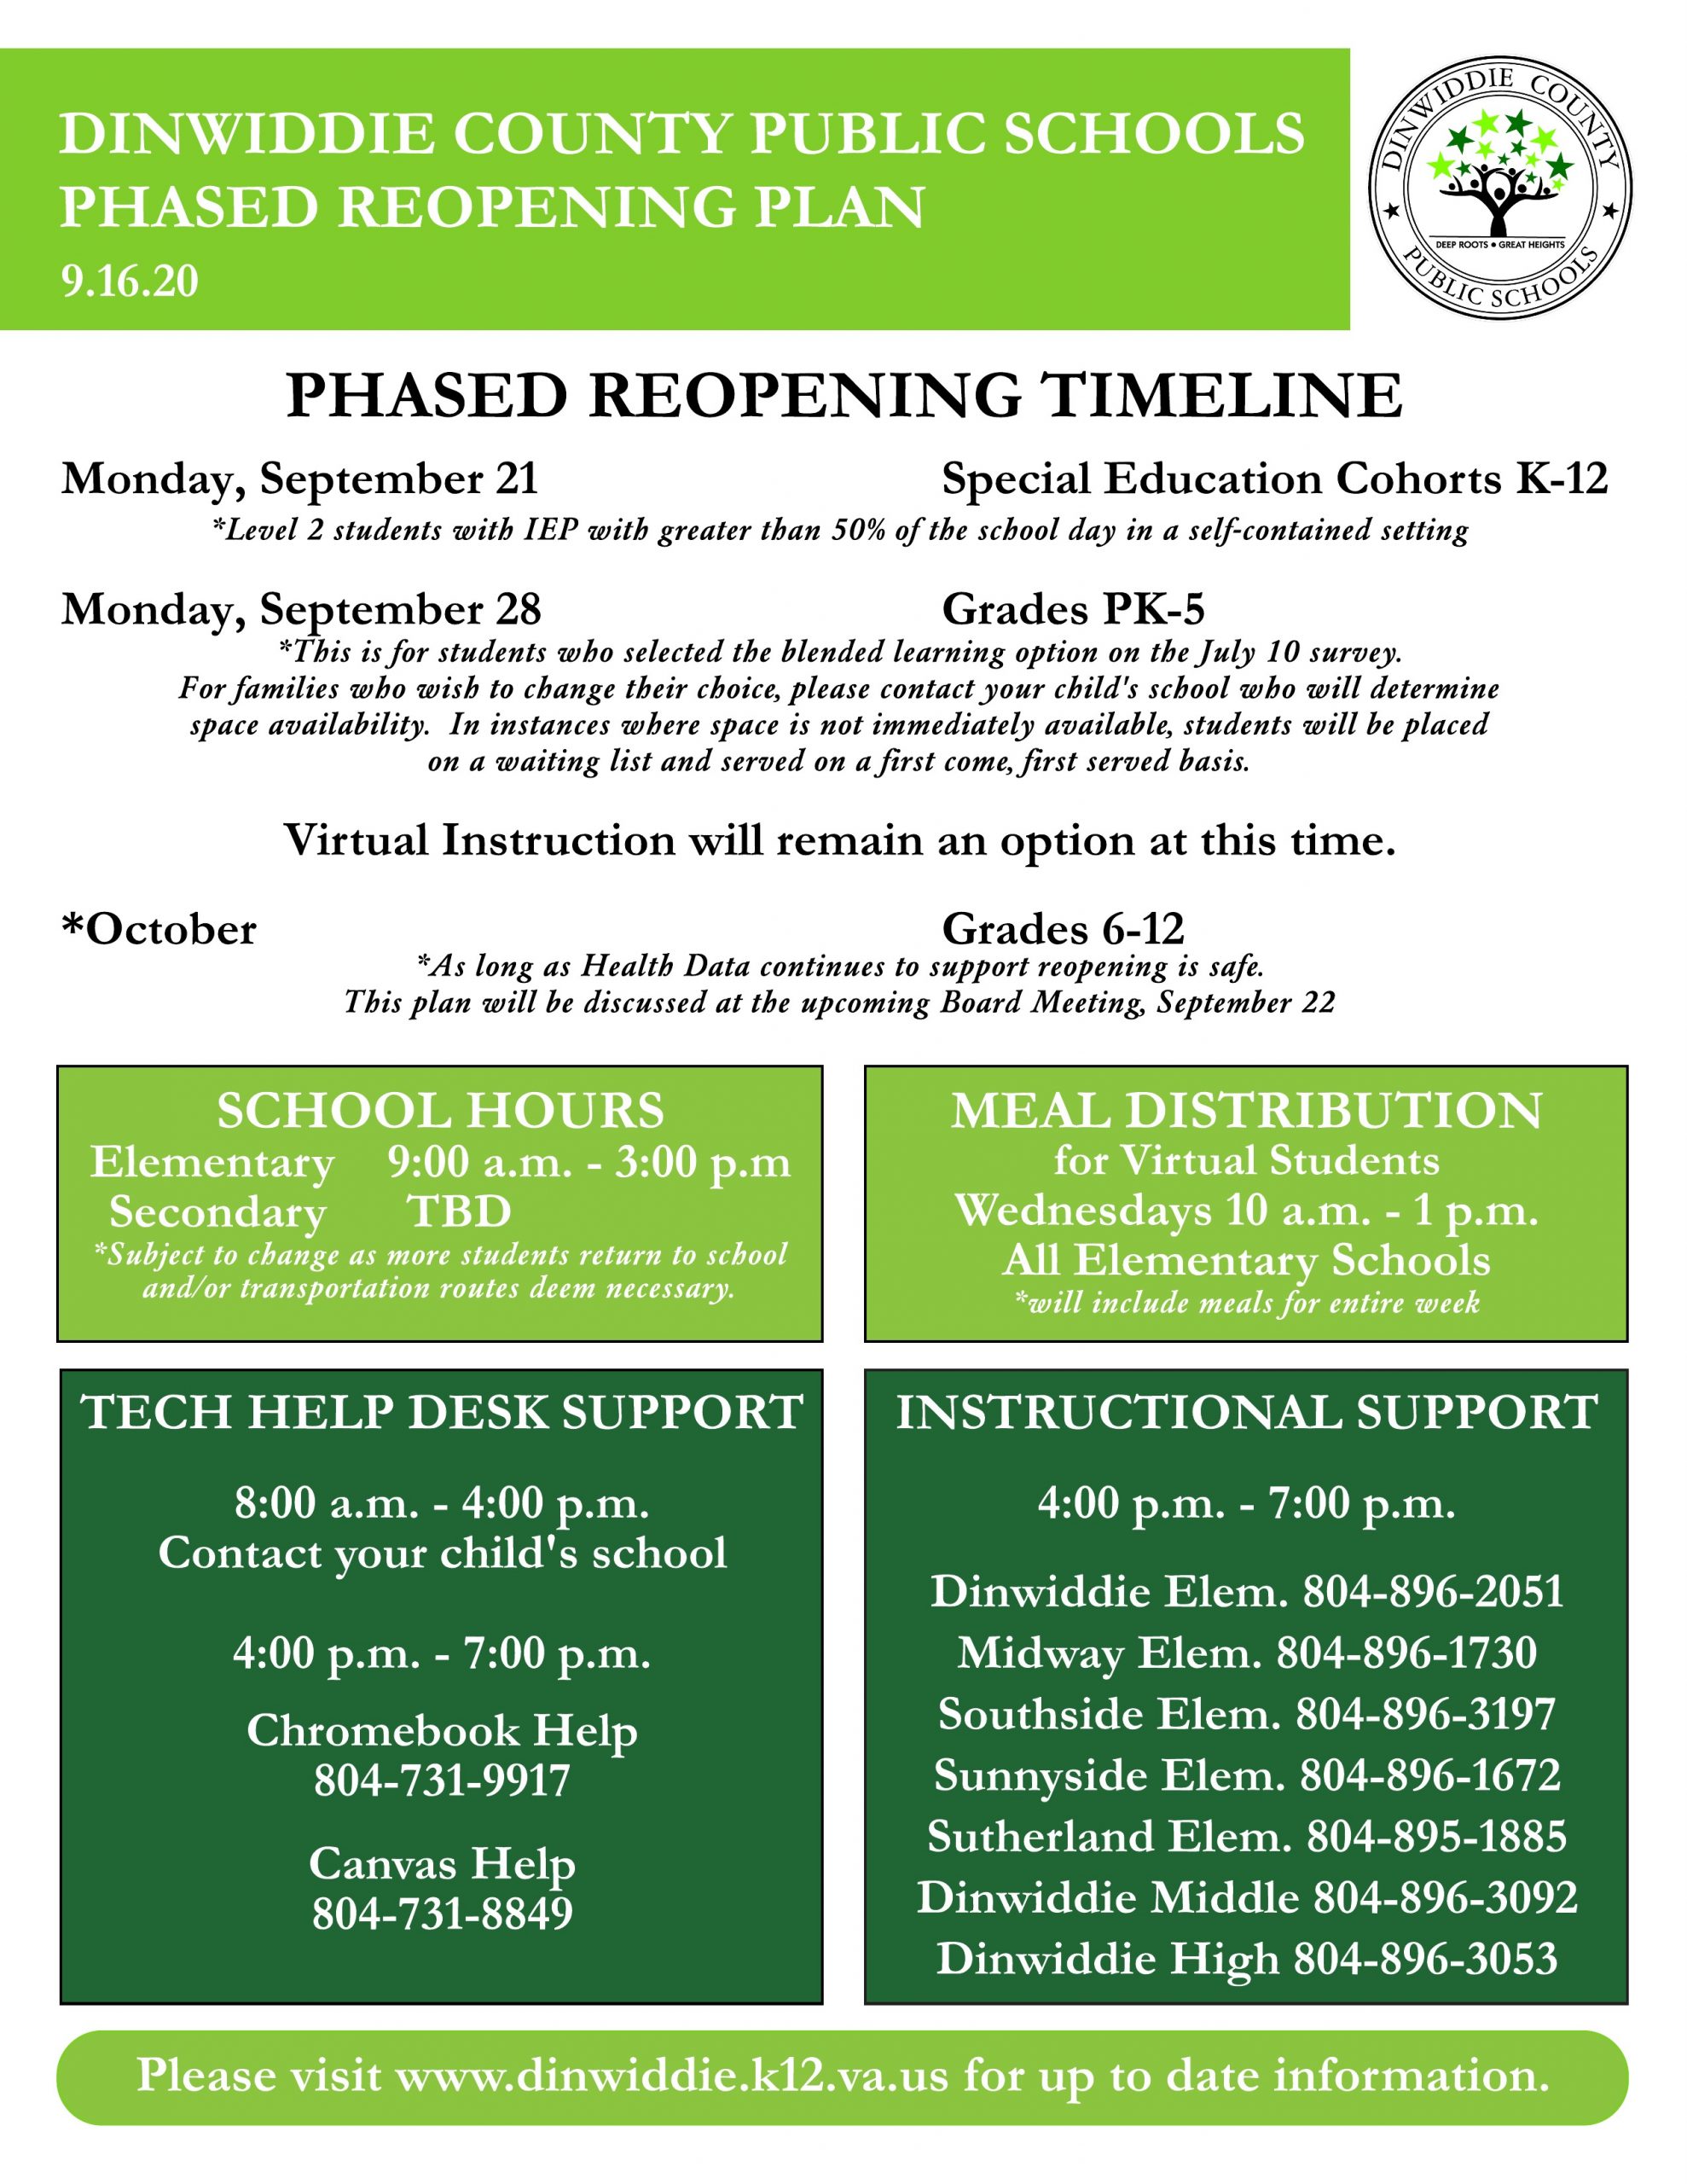 DINWIDDIE COUNTY PUBLIC SCHOOLS PHASED REOPENING PLAN 9.16.20 PHASED REOPENING TIMELINE Monday, September 21 Special Education Cohorts K-12 *Level 2 studentswith IEP with greater than 50%of theschool day in a self-contained setting Monday, September 28 GradesPK-5 *Thisisfor studentswhoselected theblended learningoption on theJuly 10 survey. For familieswhowish tochangetheir choice, pleasecontact your child'sschool whowill determine spaceavailability. In instanceswherespaceisnot immediately available, studentswill beplaced on a waiting list and served on a first come,first served basis. Virtual Instruction will remain an option at this time. *October Grades 6-12 *Aslong asHealth Data continuestosupport reopening issafe. Thisplan will bediscussed at theupcoming Board Meeting,September 22 Please visit www.dinwiddie.k12.va.us for up to date information. SCHOOL HOURS Elementary 9:00 a.m. - 3:00 p.m Secondary TBD *Subject tochangeasmorestudentsreturn toschool and/or transportation routesdeemnecessary. TECH HELP DESK SUPPORT 8:00 a.m. - 4:00 p.m. Contact your child's school 4:00 p.m. - 7:00 p.m. Chromebook Help 804-731-9917 Canvas Help 804-731-8849 INSTRUCTIONAL SUPPORT 4:00 p.m. - 7:00 p.m. DinwiddieElem. 804-896-2051 Midway Elem. 804-896-1730 SouthsideElem. 804-896-3197 SunnysideElem. 804-896-1672 Sutherland Elem. 804-895-1885 Dinwiddie Middle 804-896-3092 Dinwiddie High 804-896-3053